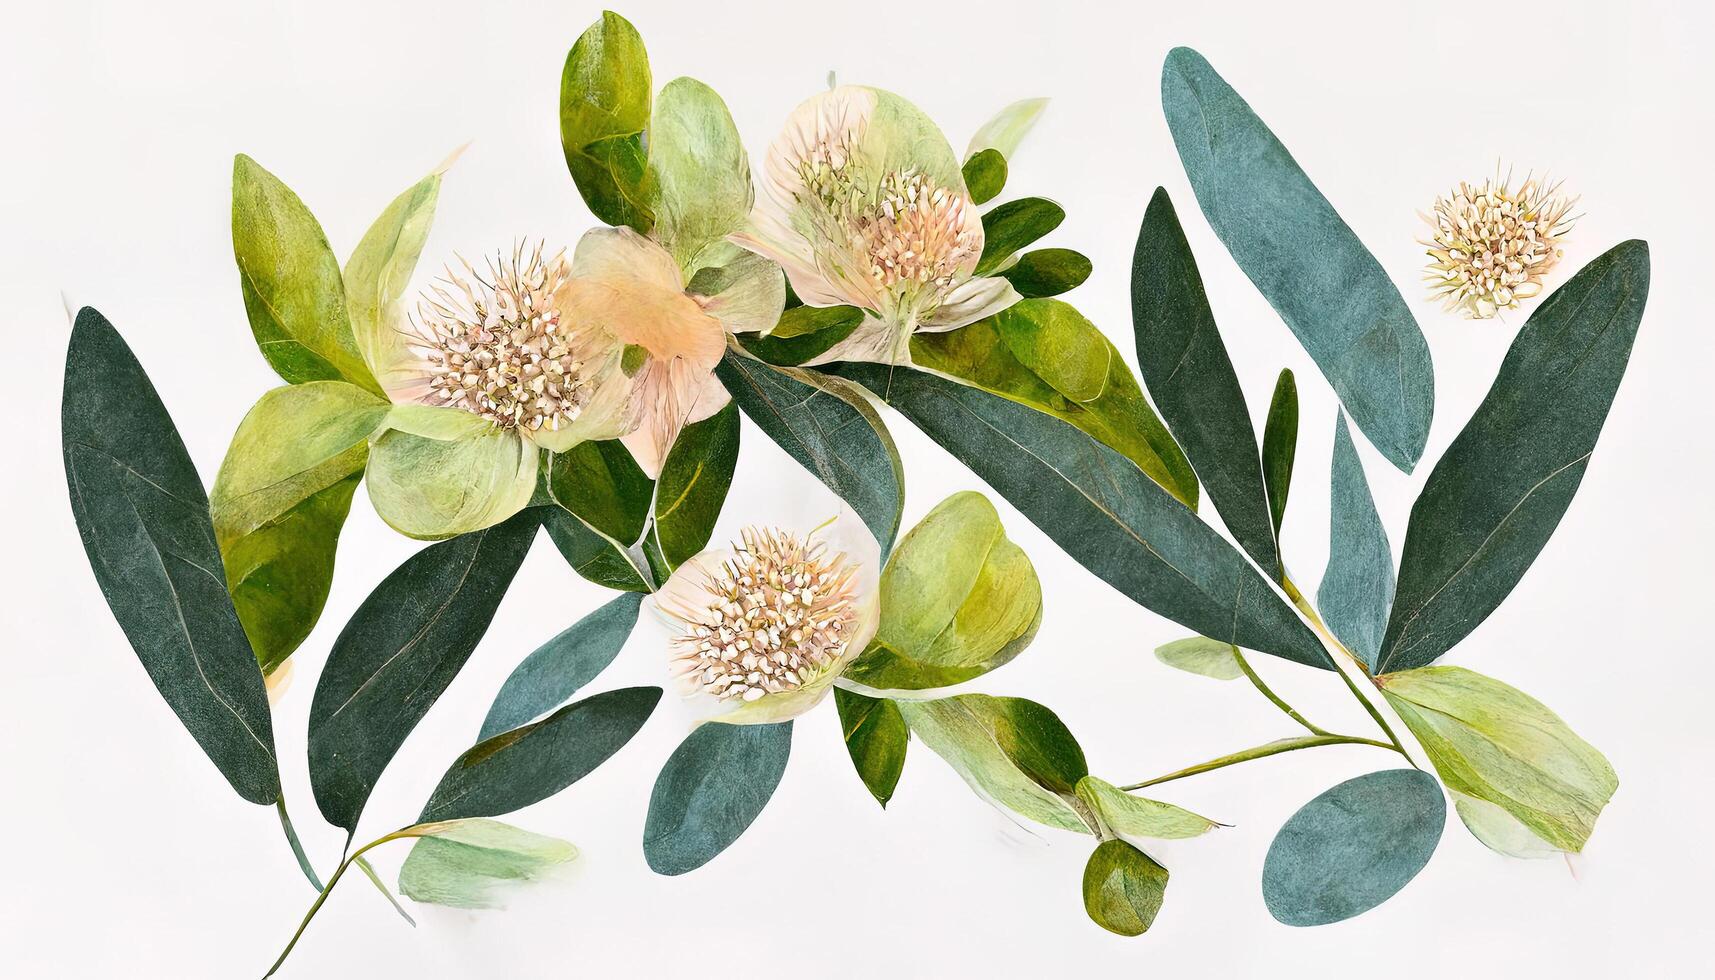 Watercolor eucalyptus flower arrangement, Greenery branches and jasmine flowers clipart. photo